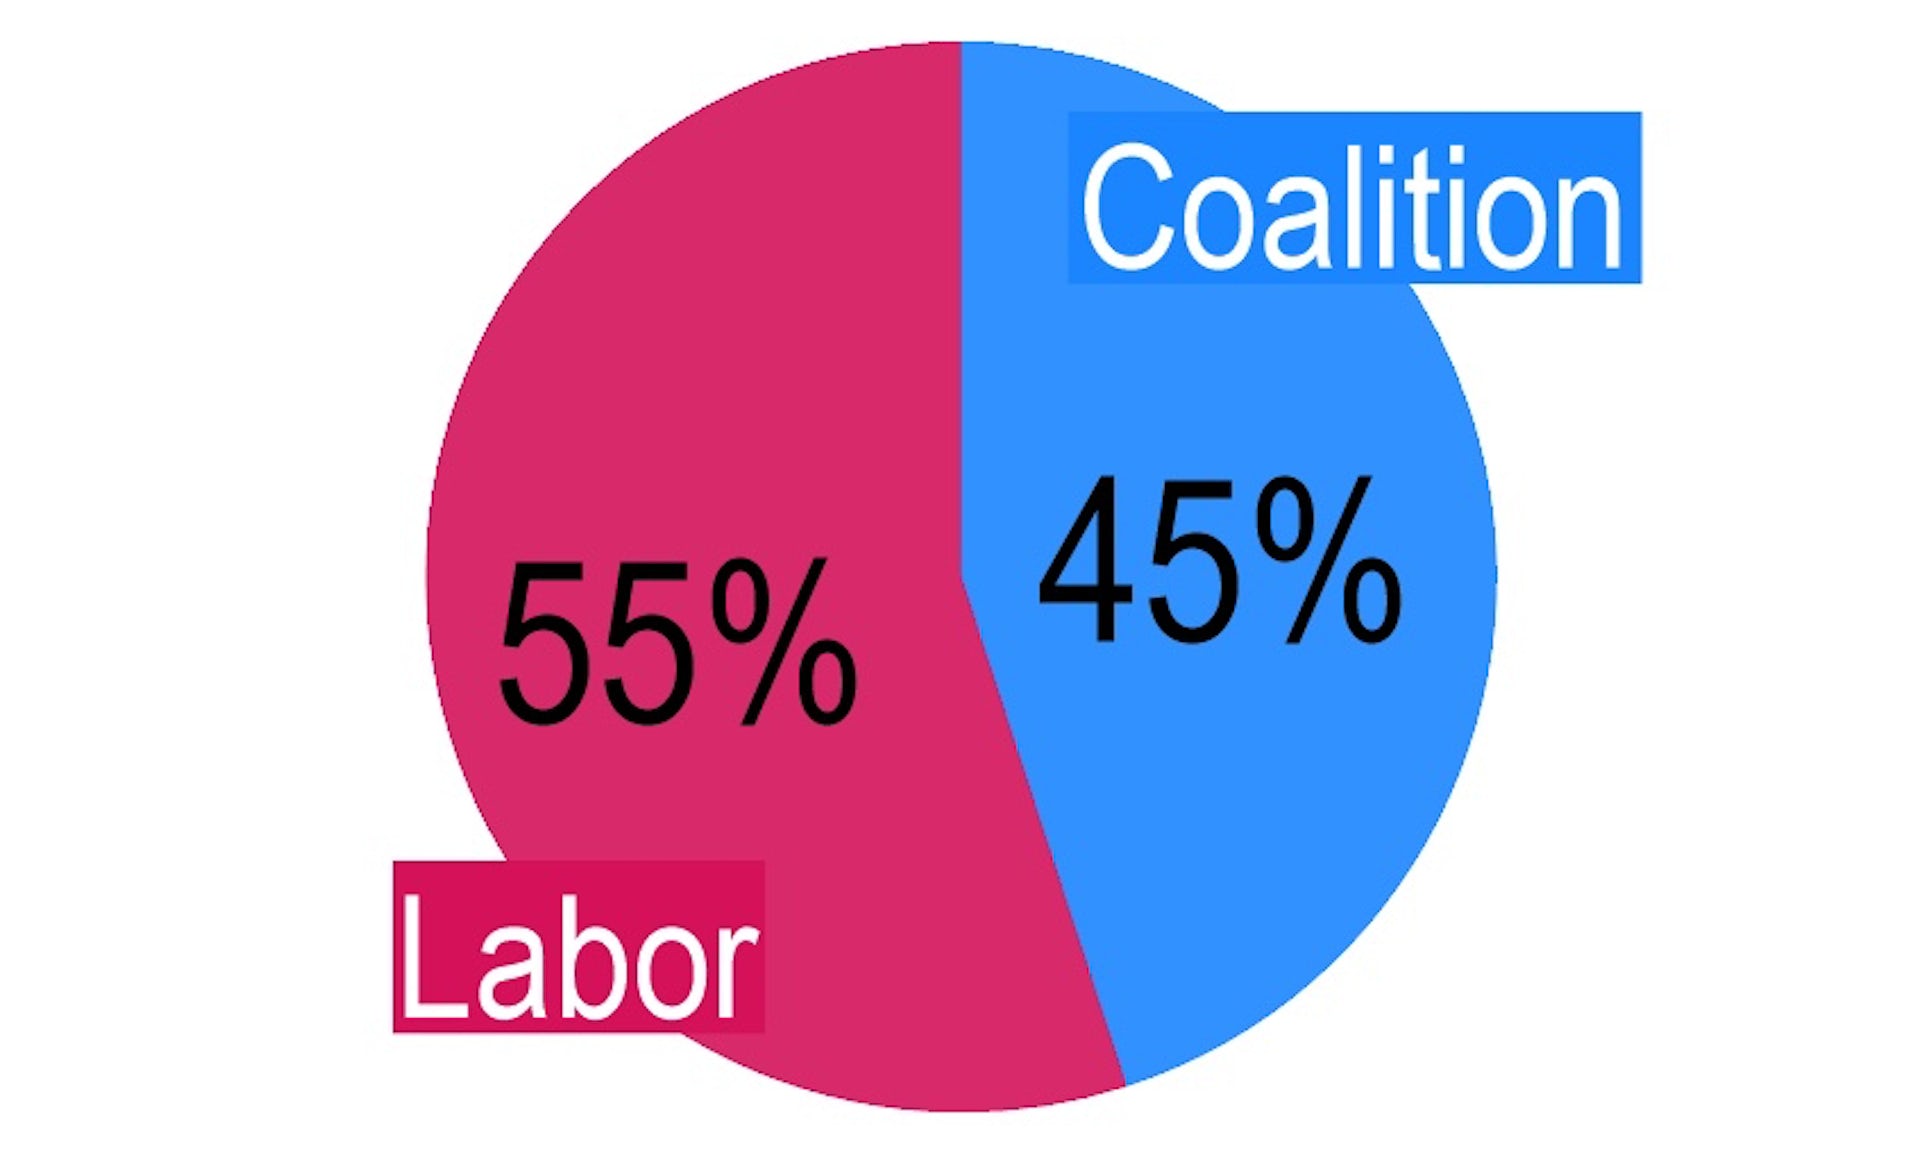 55% for labor, 45% for coalition on a red and blue pie chart